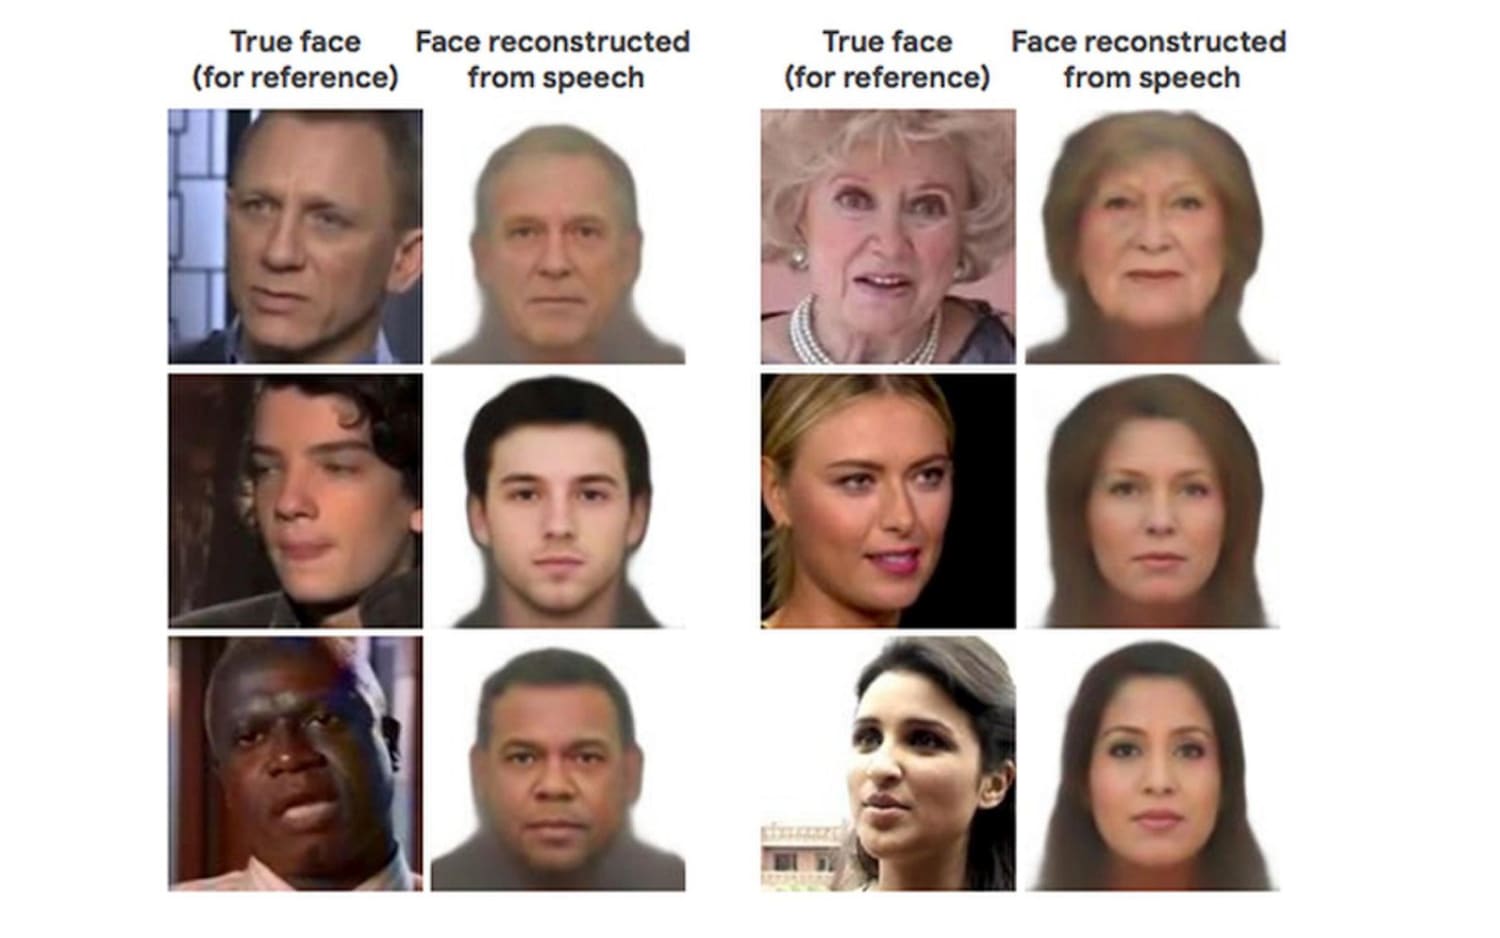 Artificial Intelligence Generates Humans’ Faces Based on Their Voices